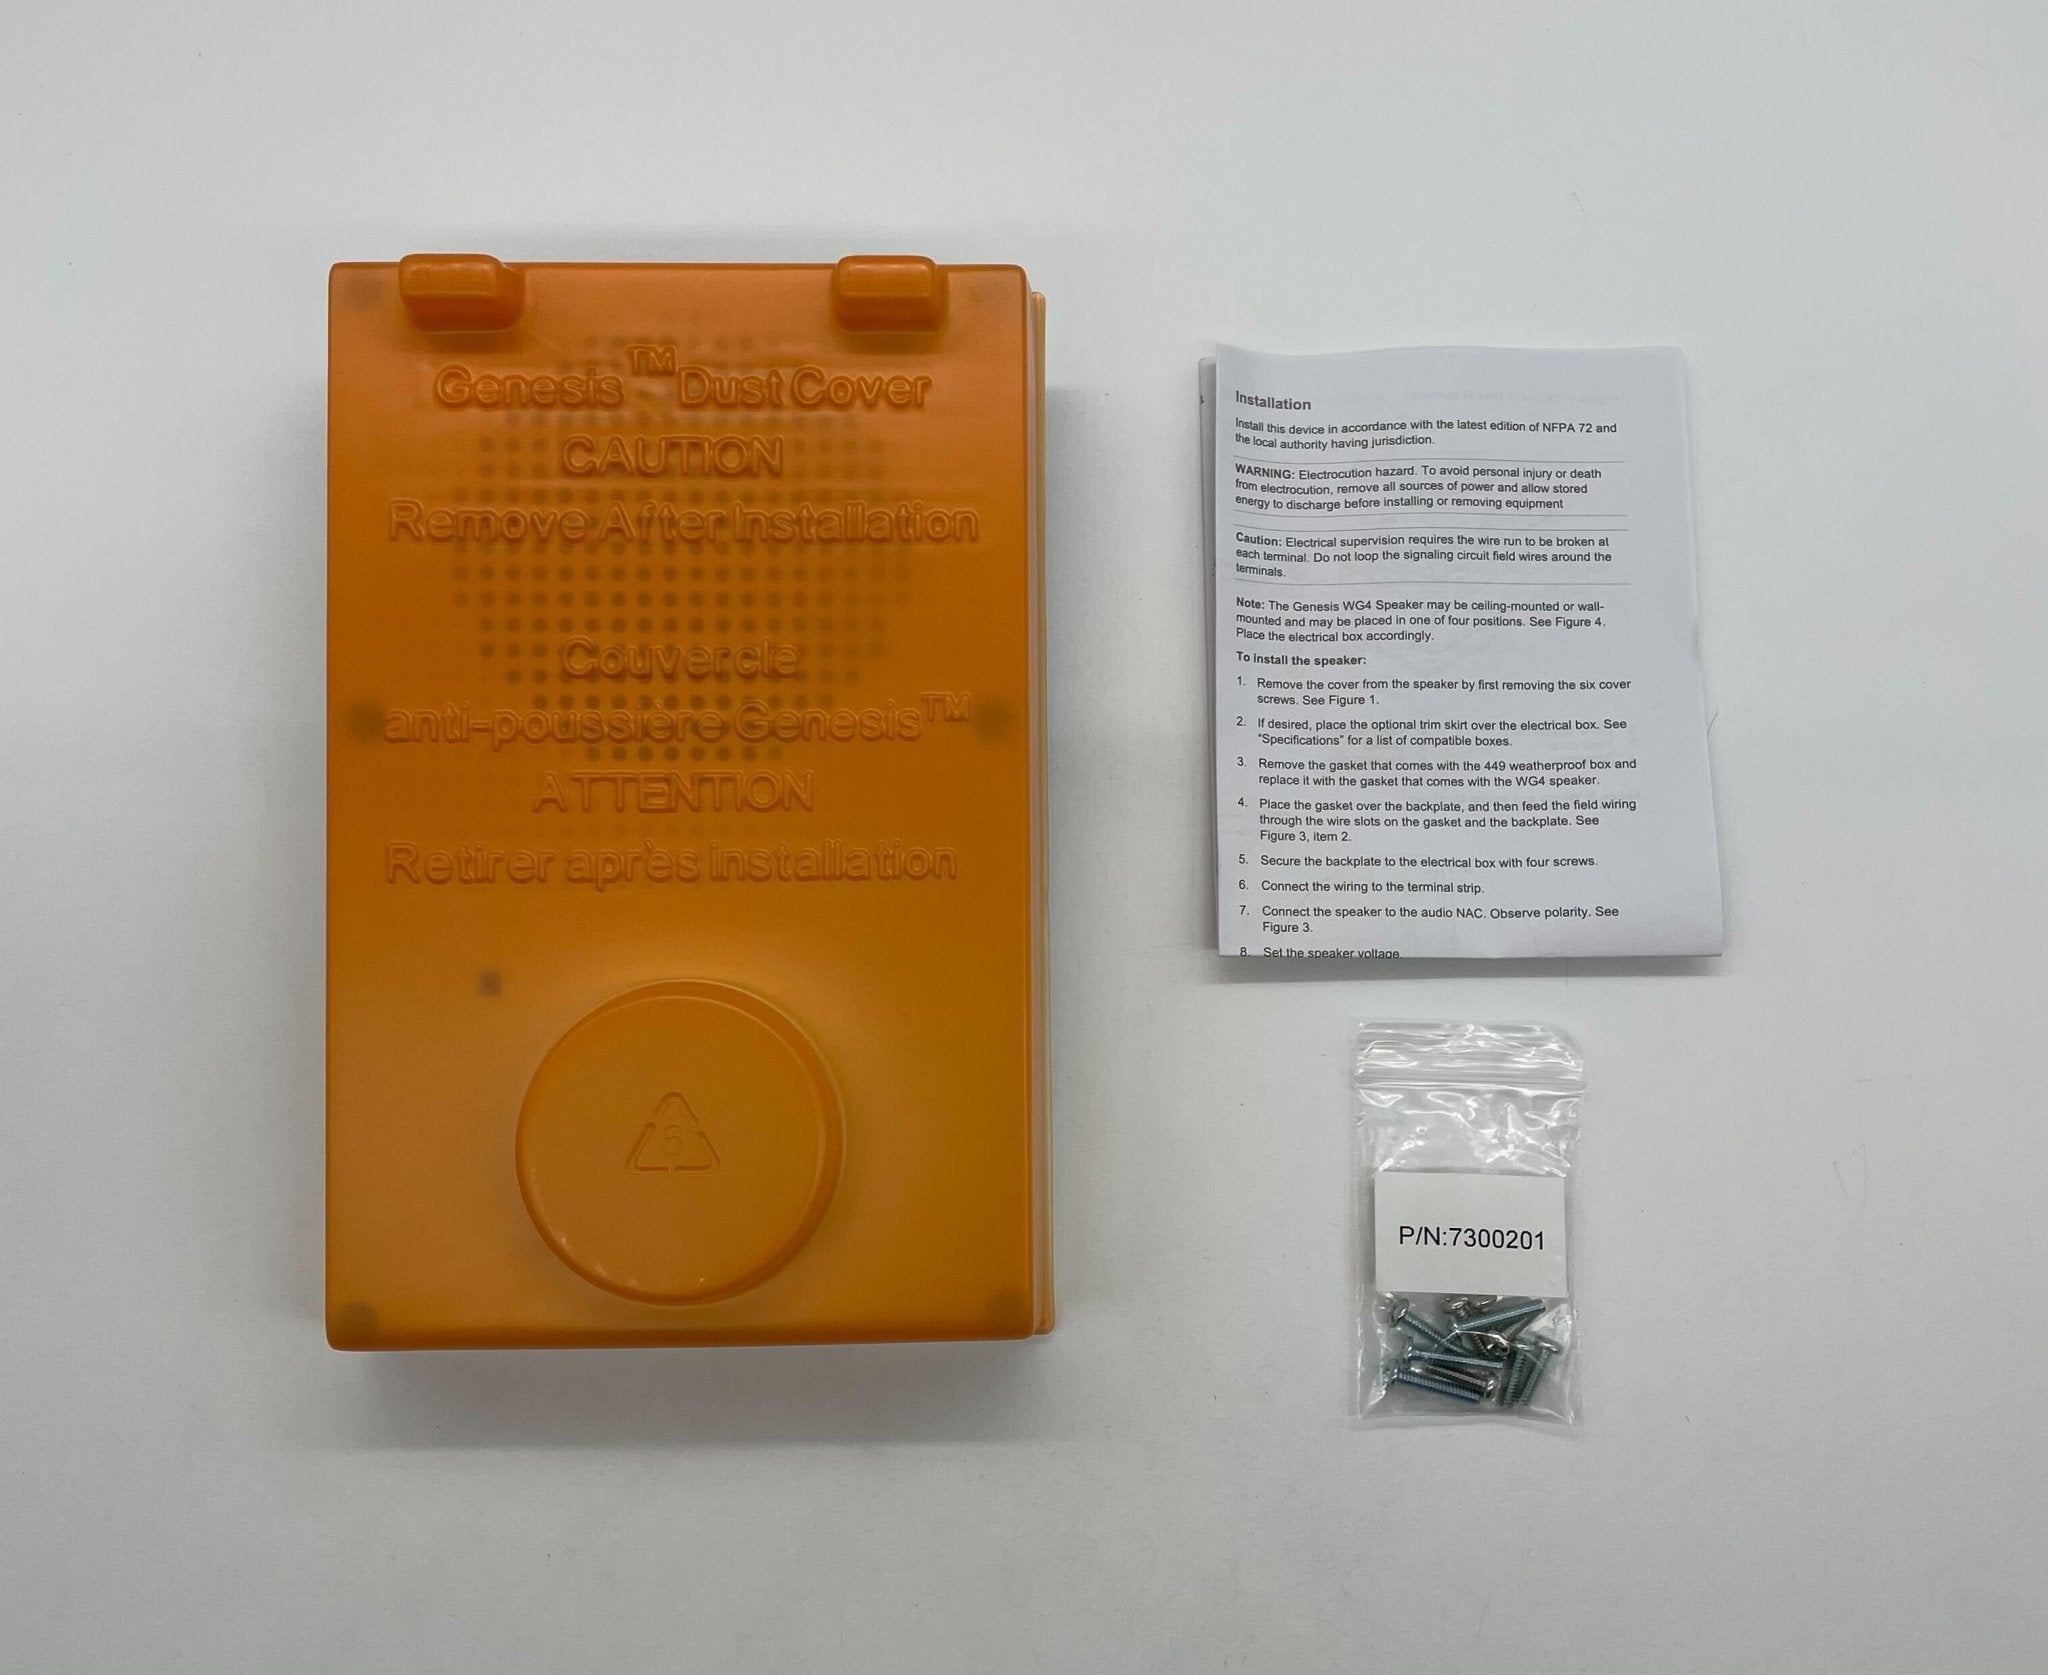 Edwards WG4WN-S - The Fire Alarm Supplier